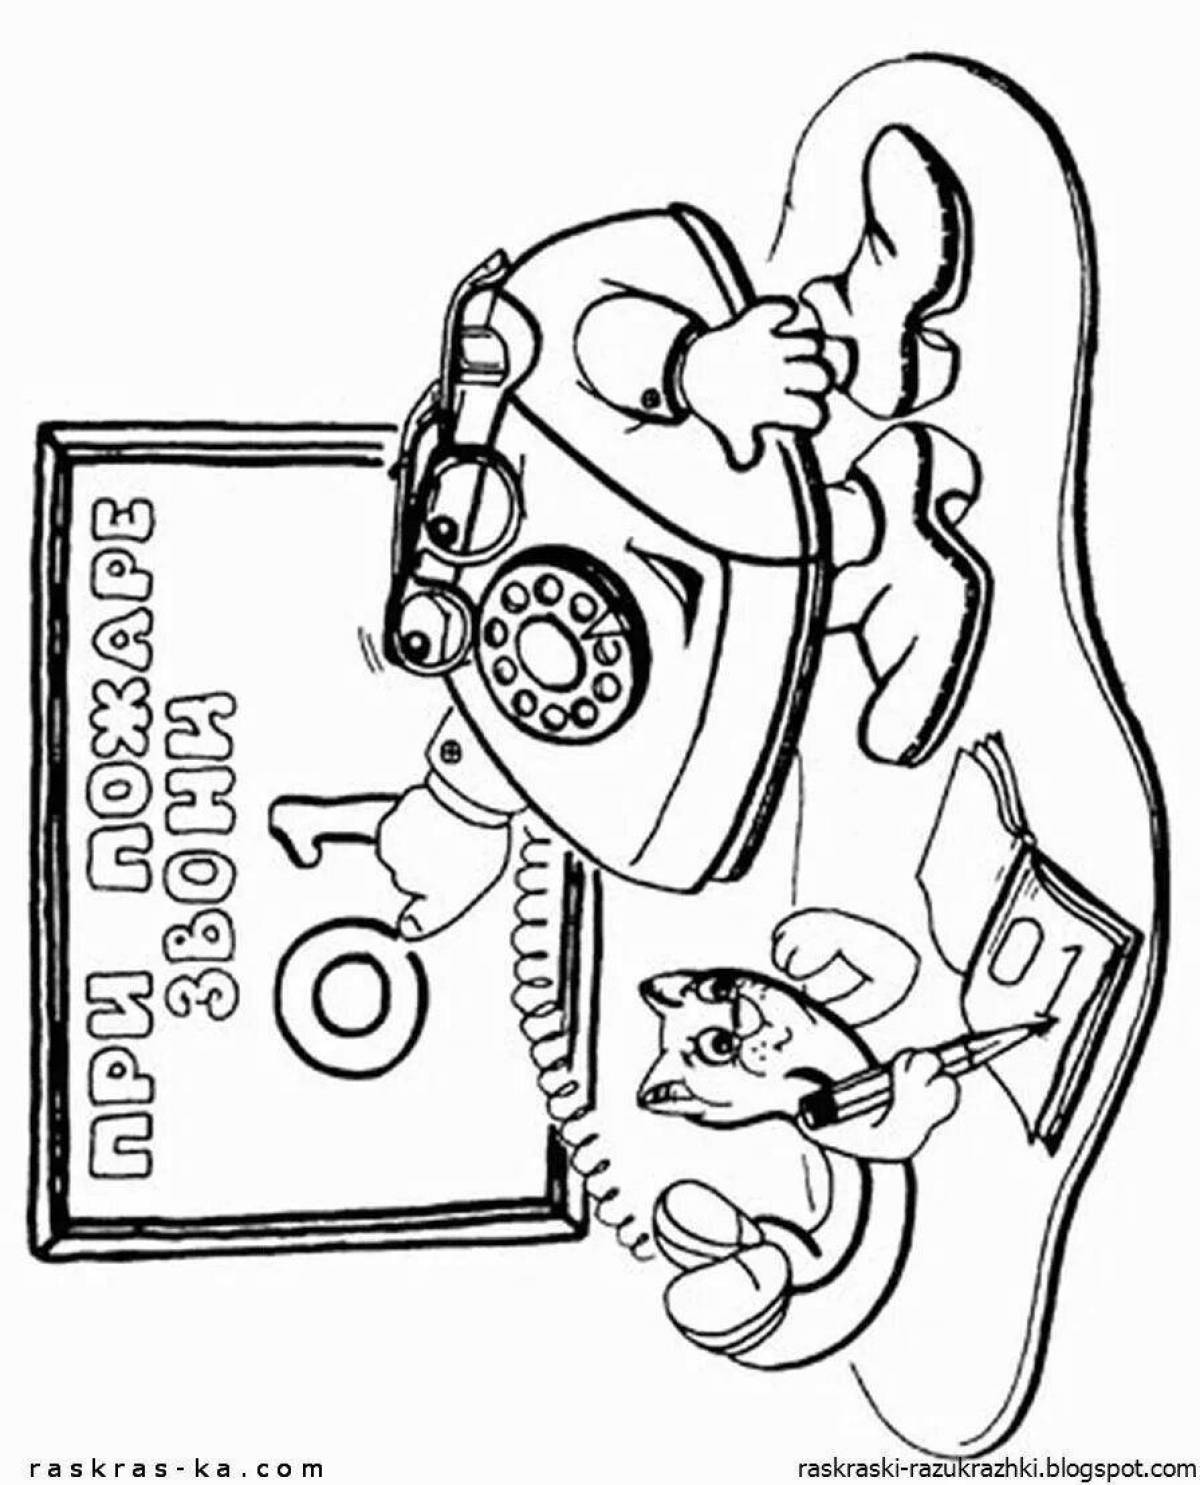 Fire safety coloring page